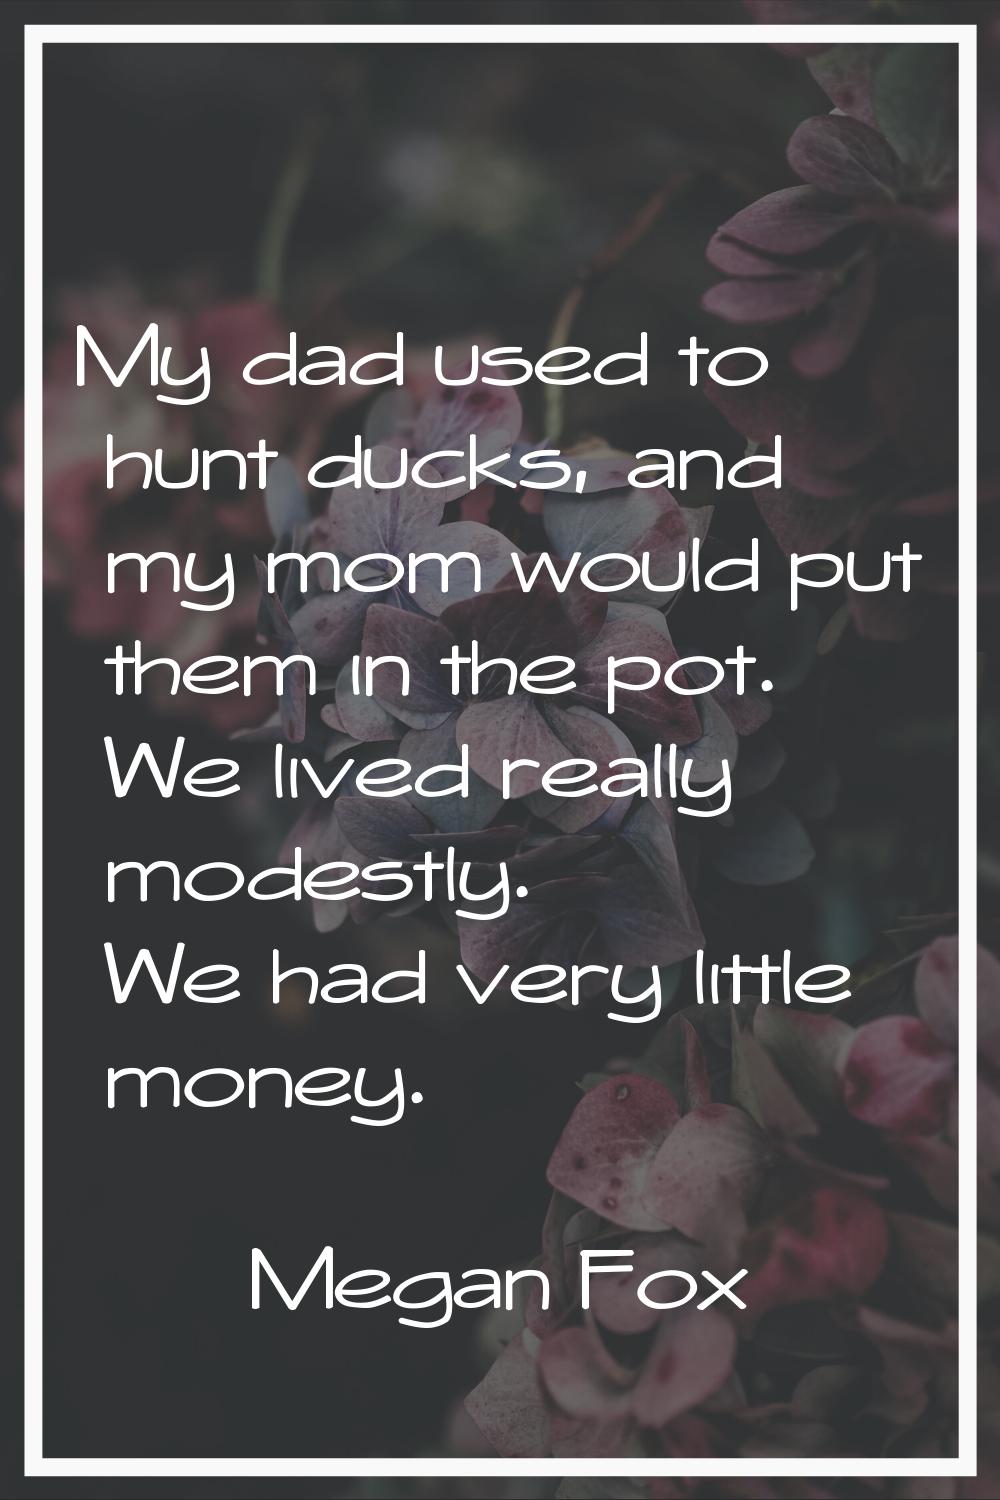 My dad used to hunt ducks, and my mom would put them in the pot. We lived really modestly. We had v